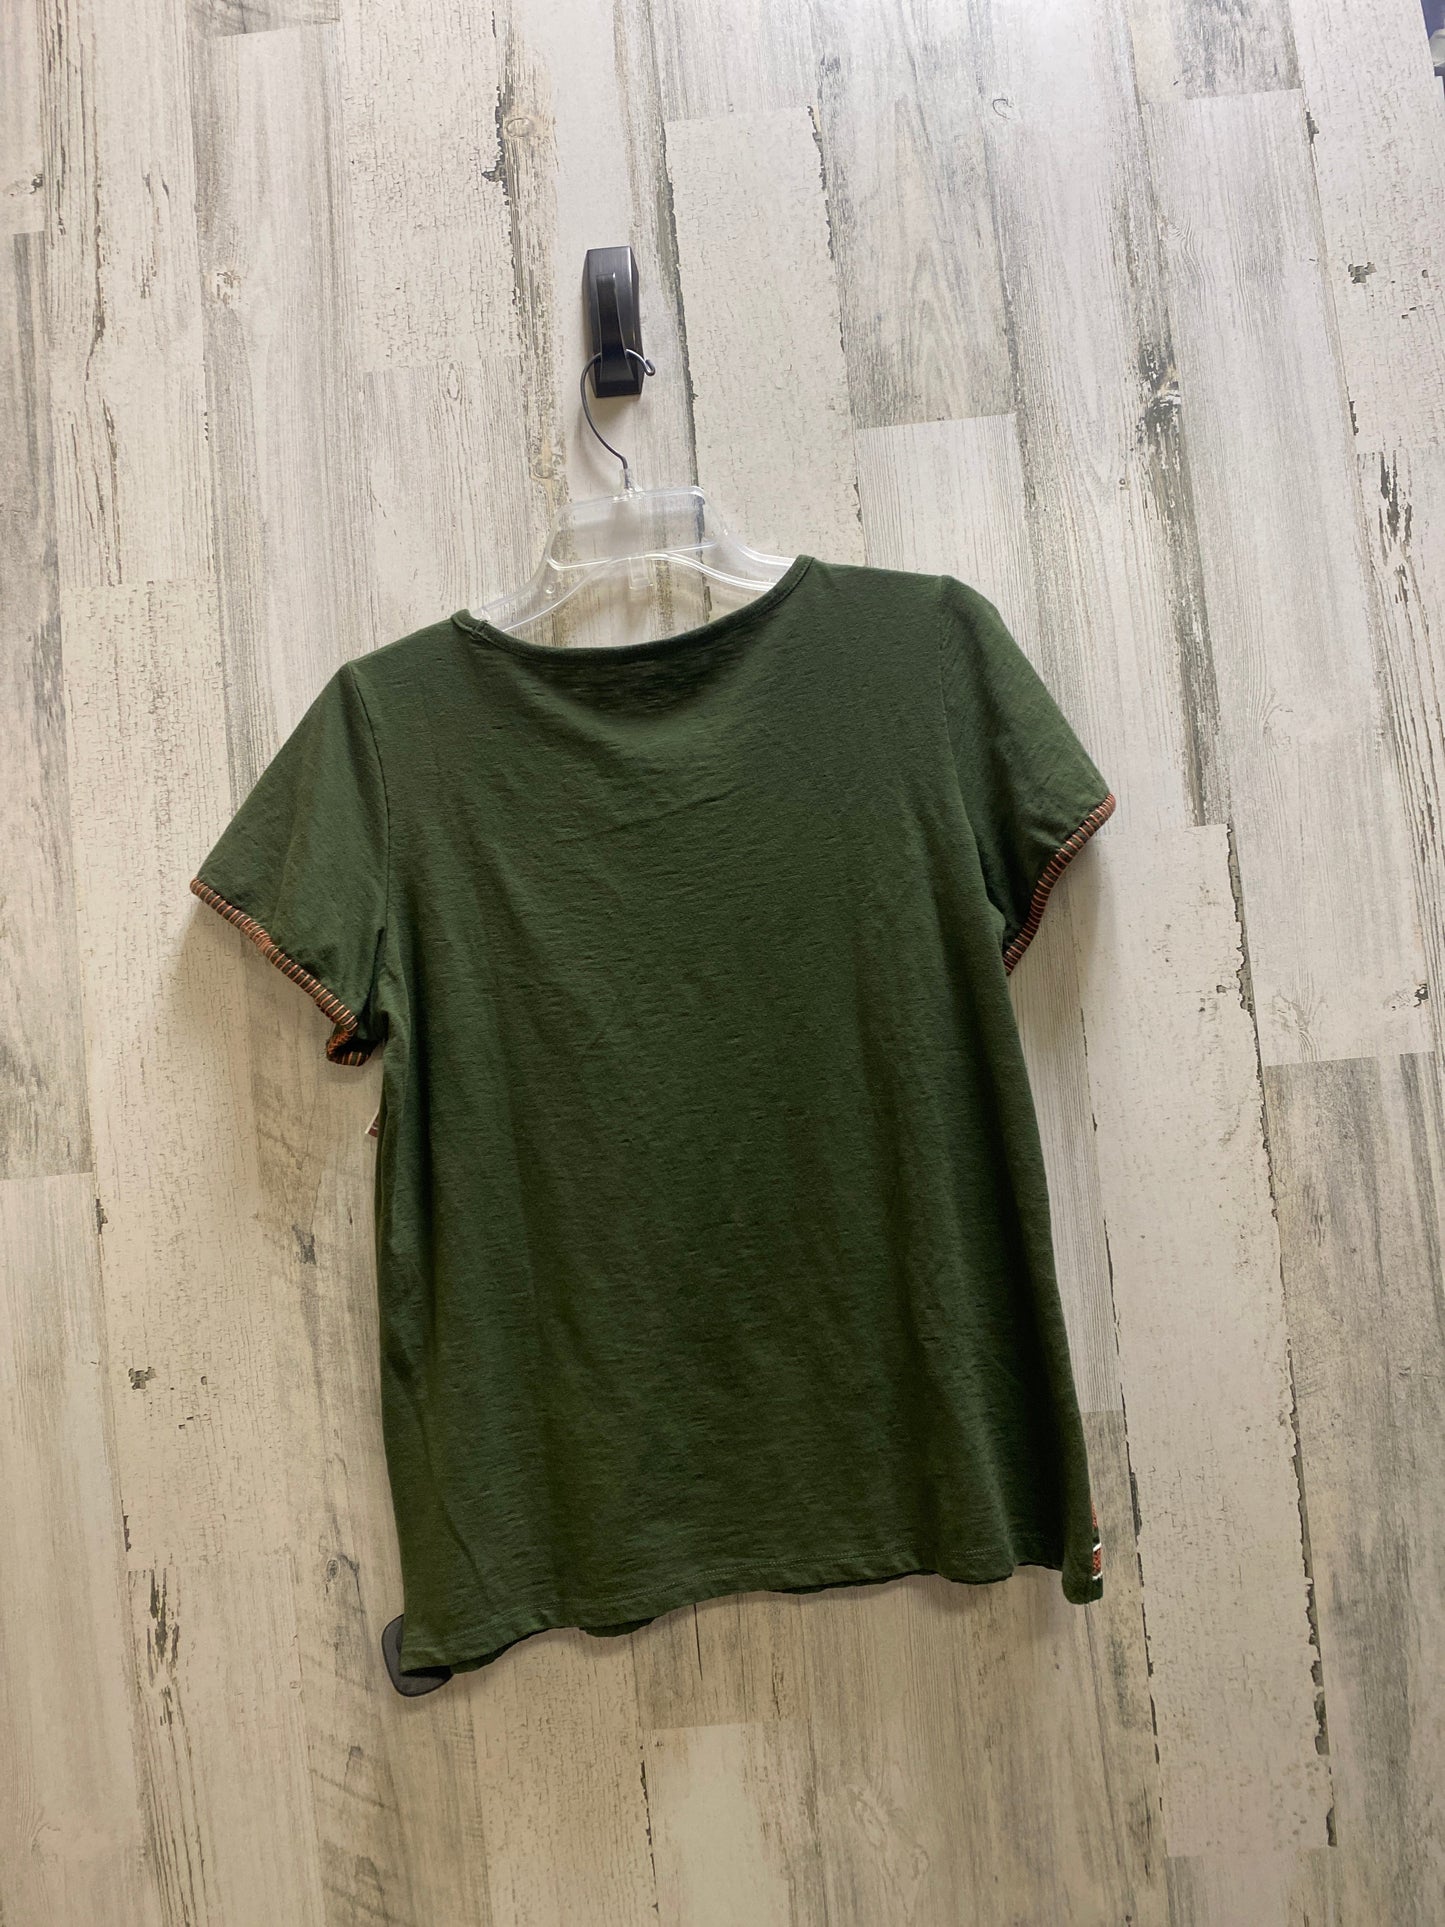 Top Short Sleeve By St Johns Bay  Size: M